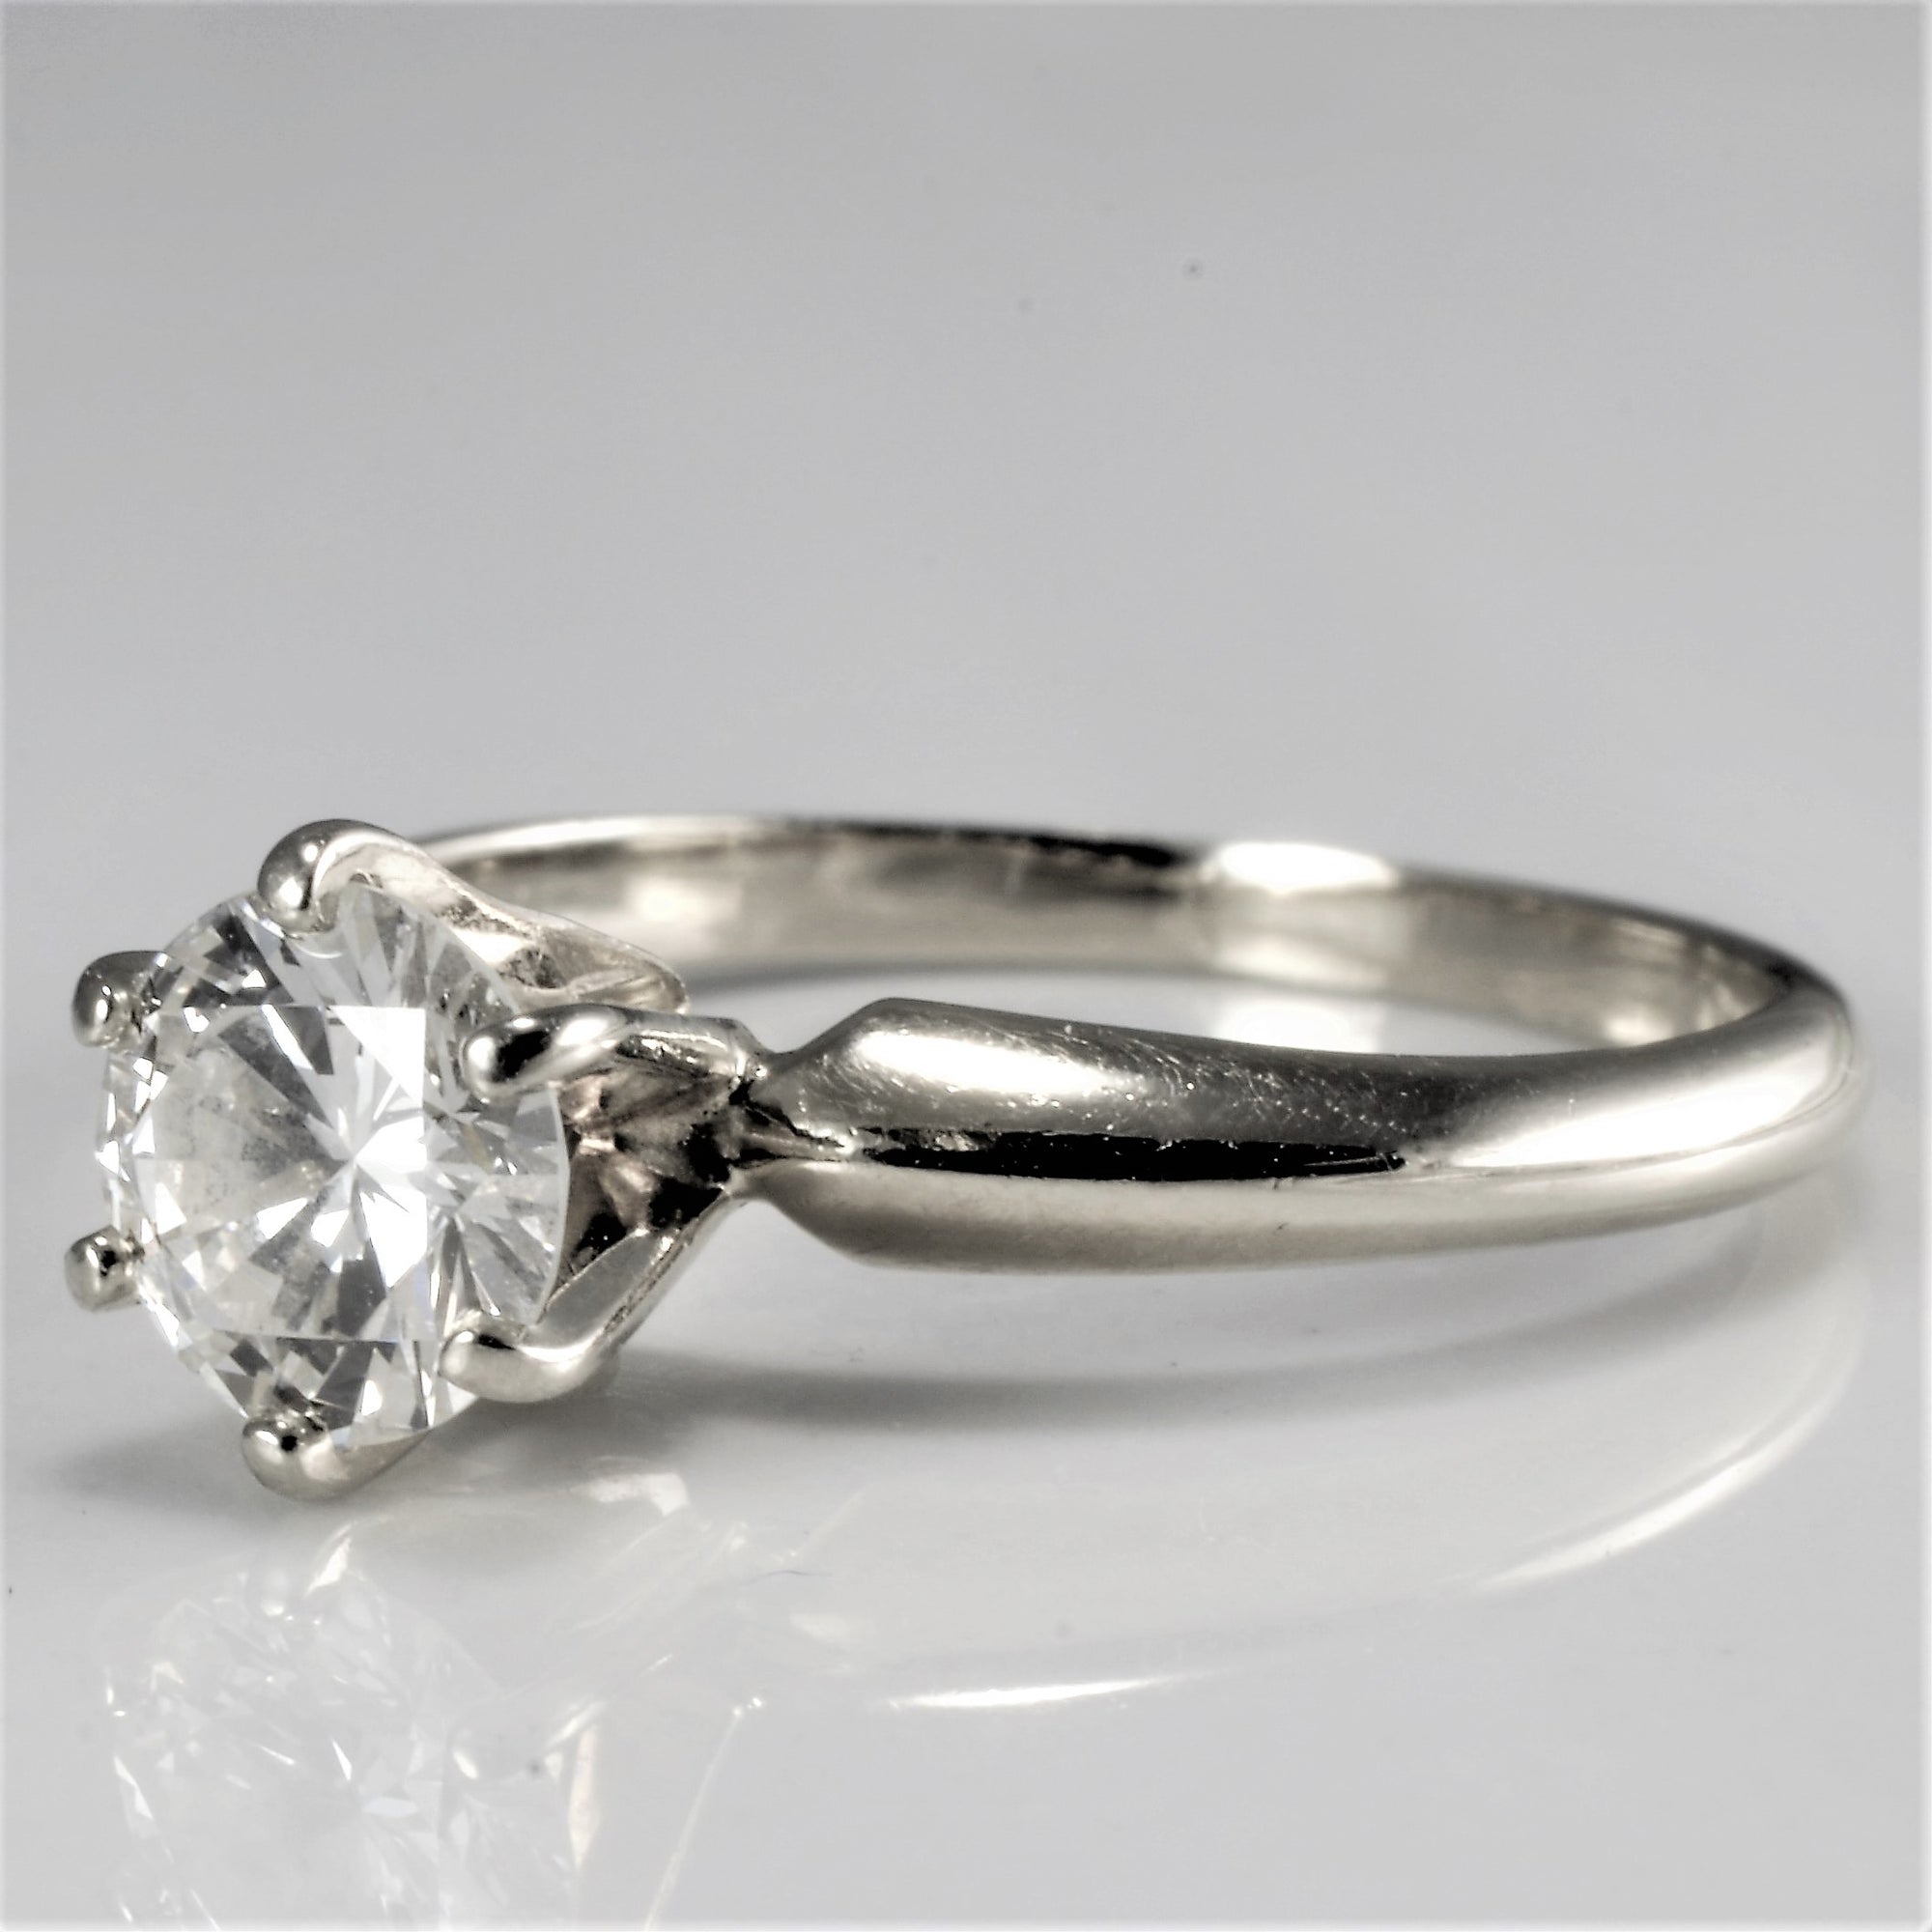 Six Prong Solitaire Diamond Ring | 0.60 ct, SZ 4.5 |